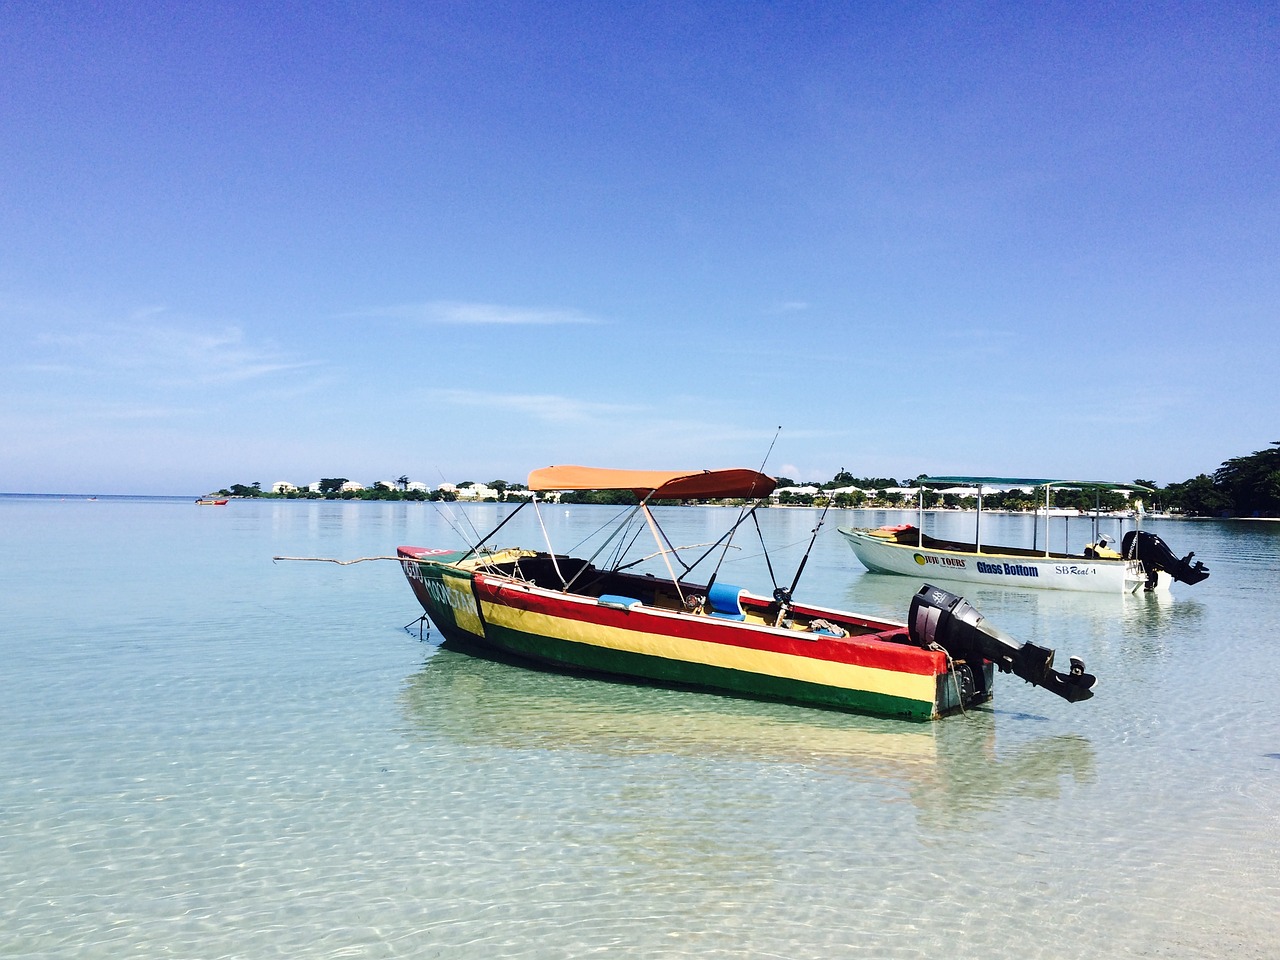 5-Day Adventure in Negril